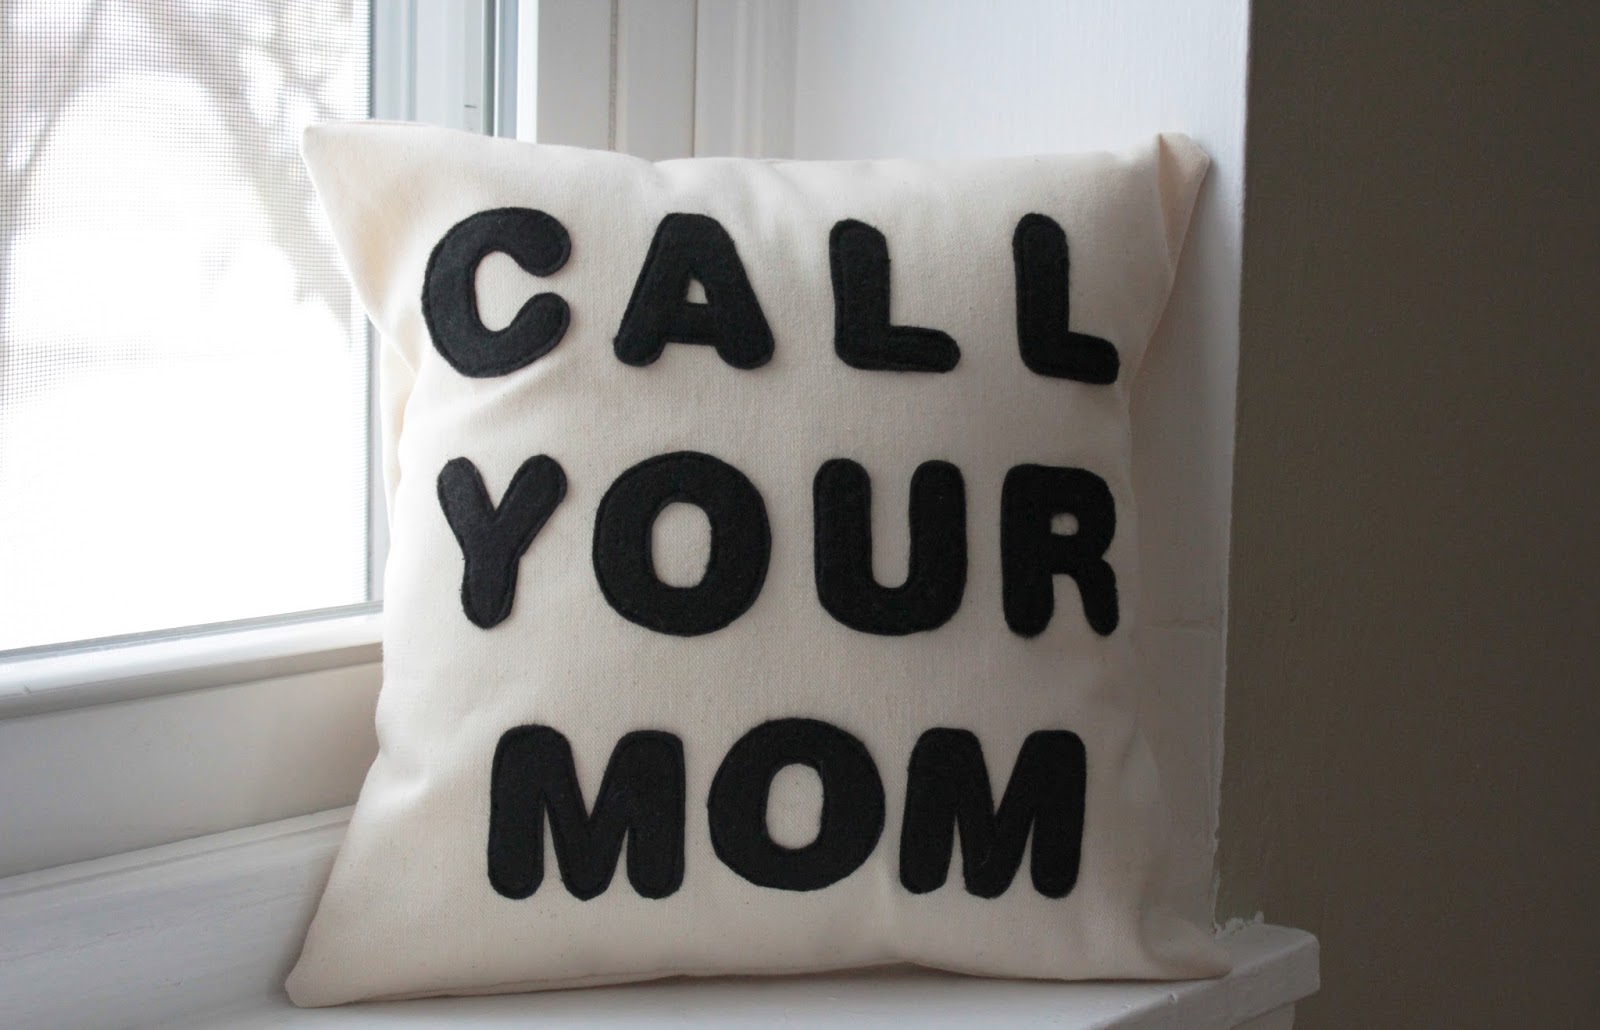 This is to call your. Call your mother. Your Call. Call your mom значок погони. Chase icon Call your mom обложка.